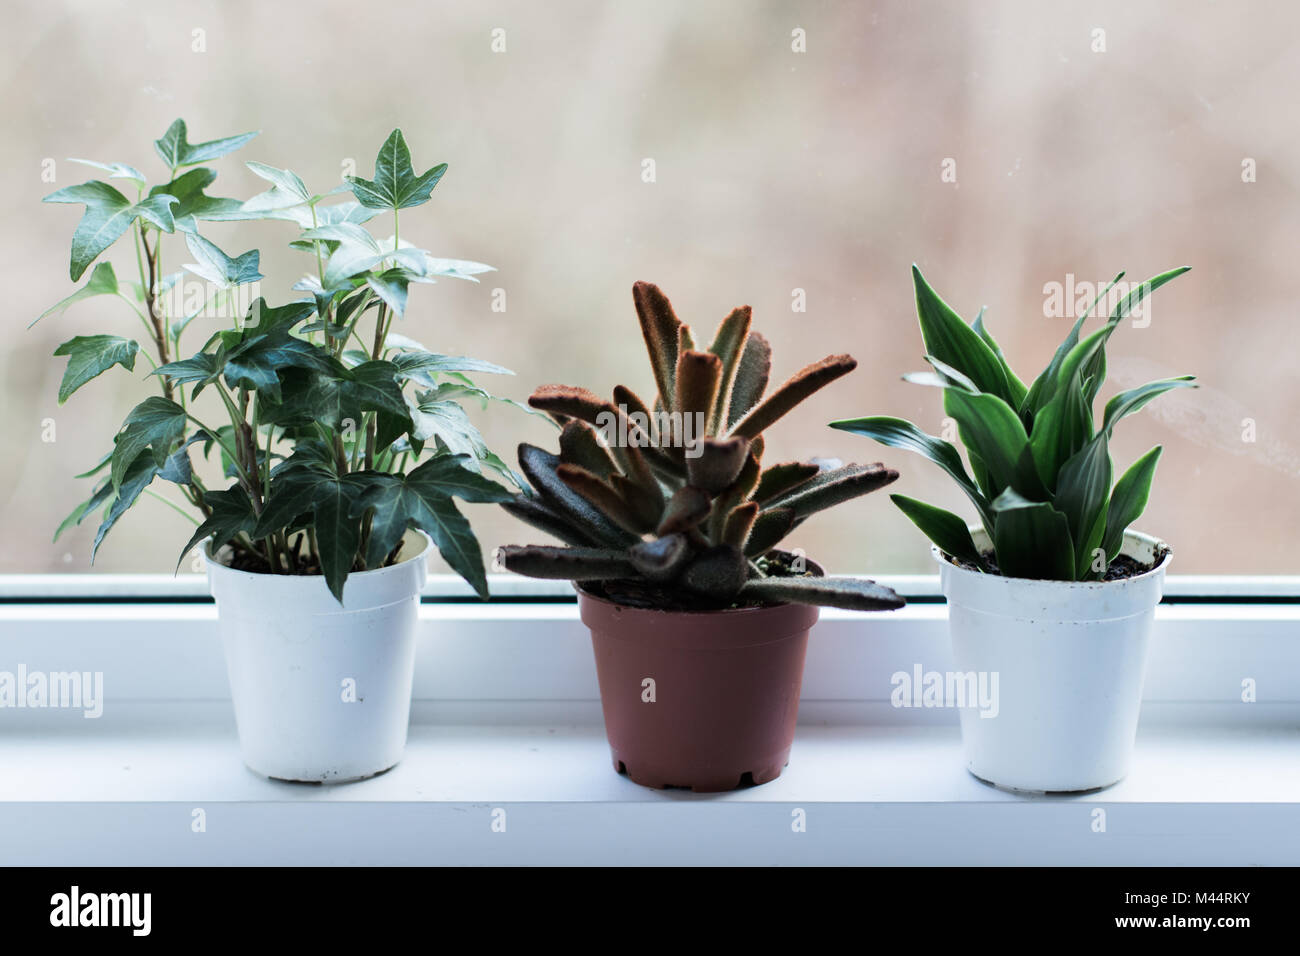 Succulents and tiny plants in natural light Stock Photo